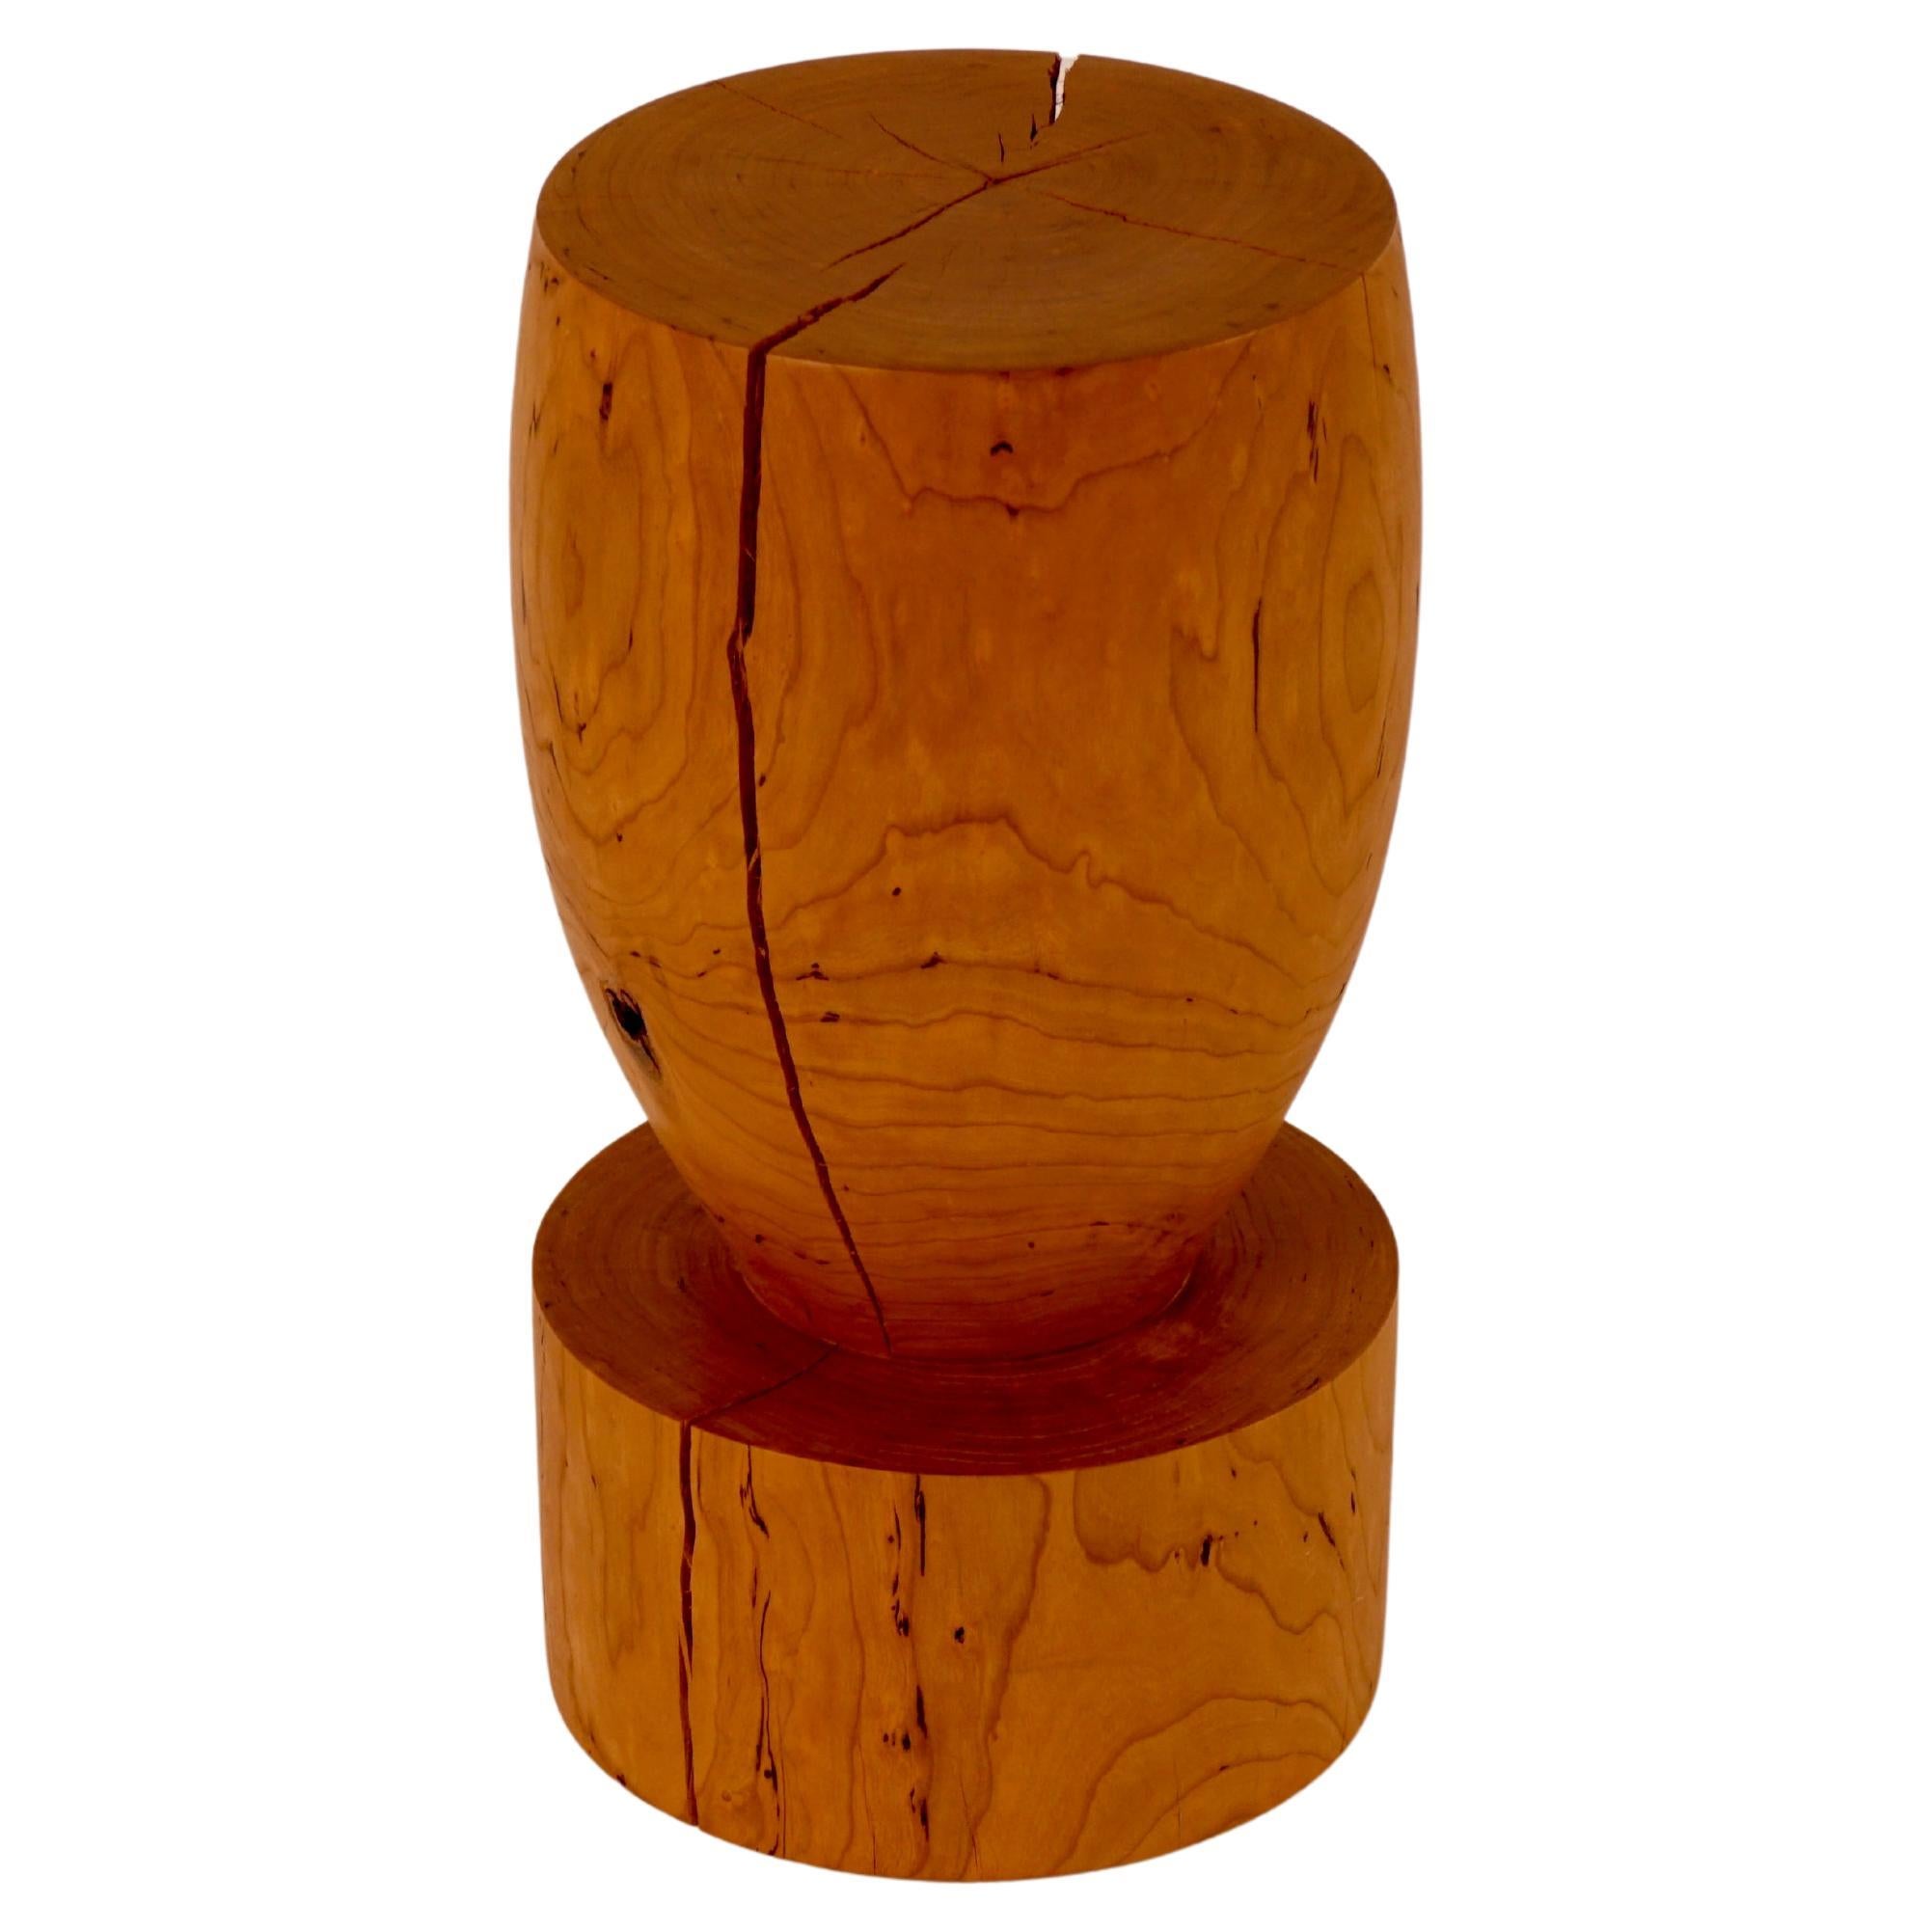 Turned Wooden Mini-Pedestal Table #3 in Cherry For Sale